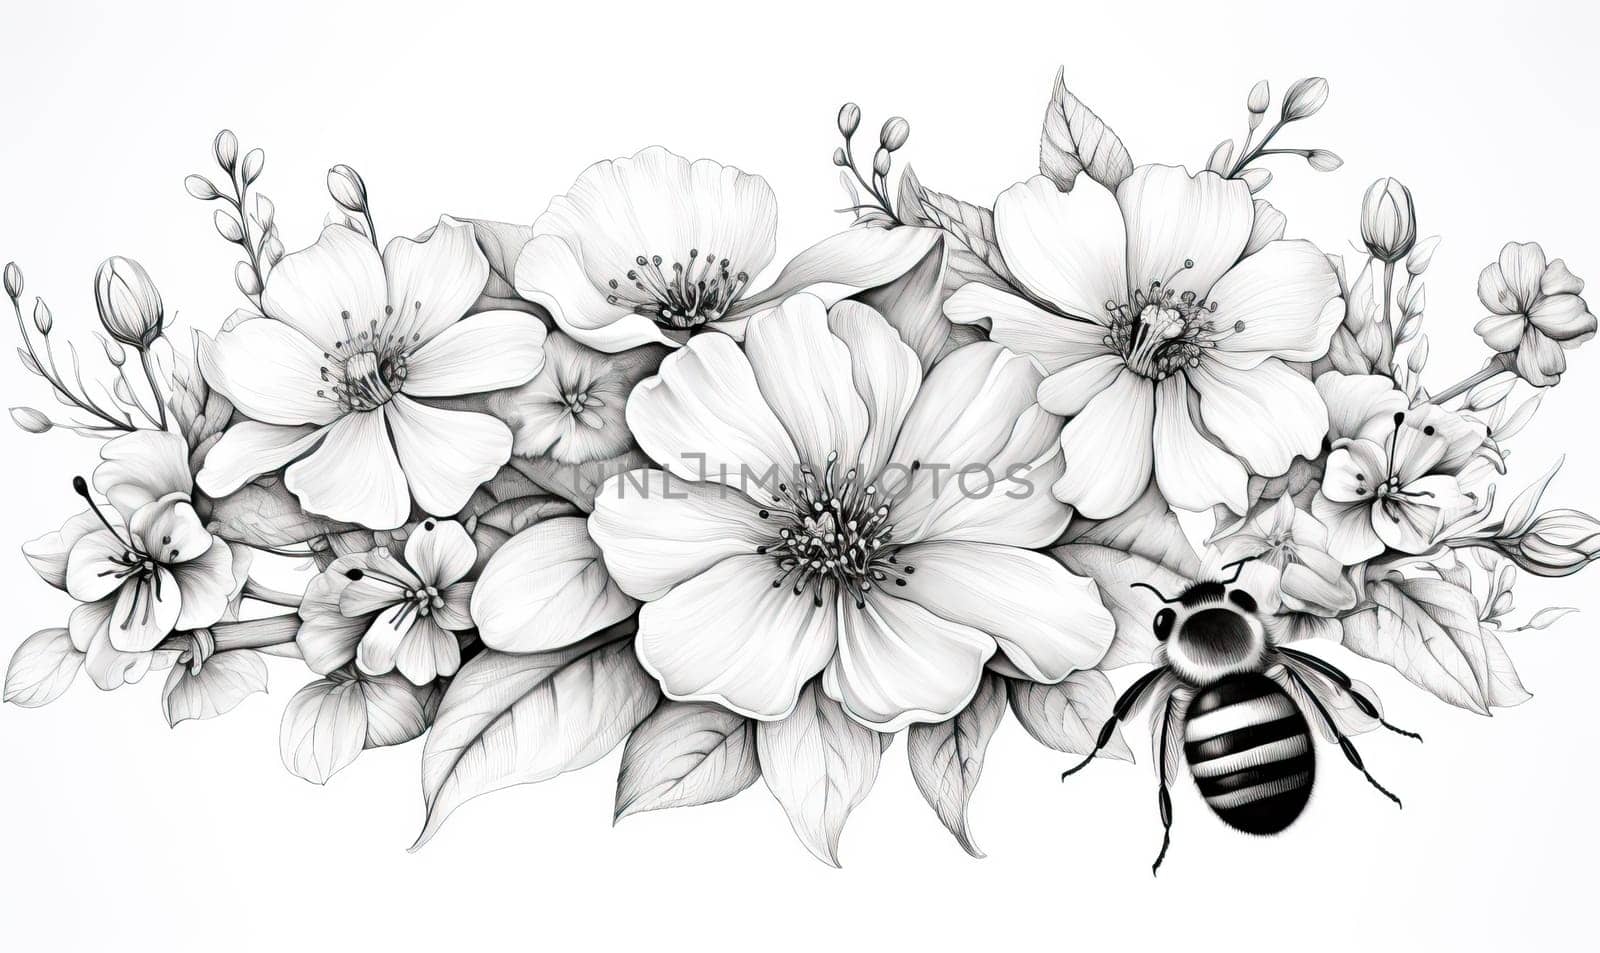 Black and white image of a bee on flowers. by Fischeron